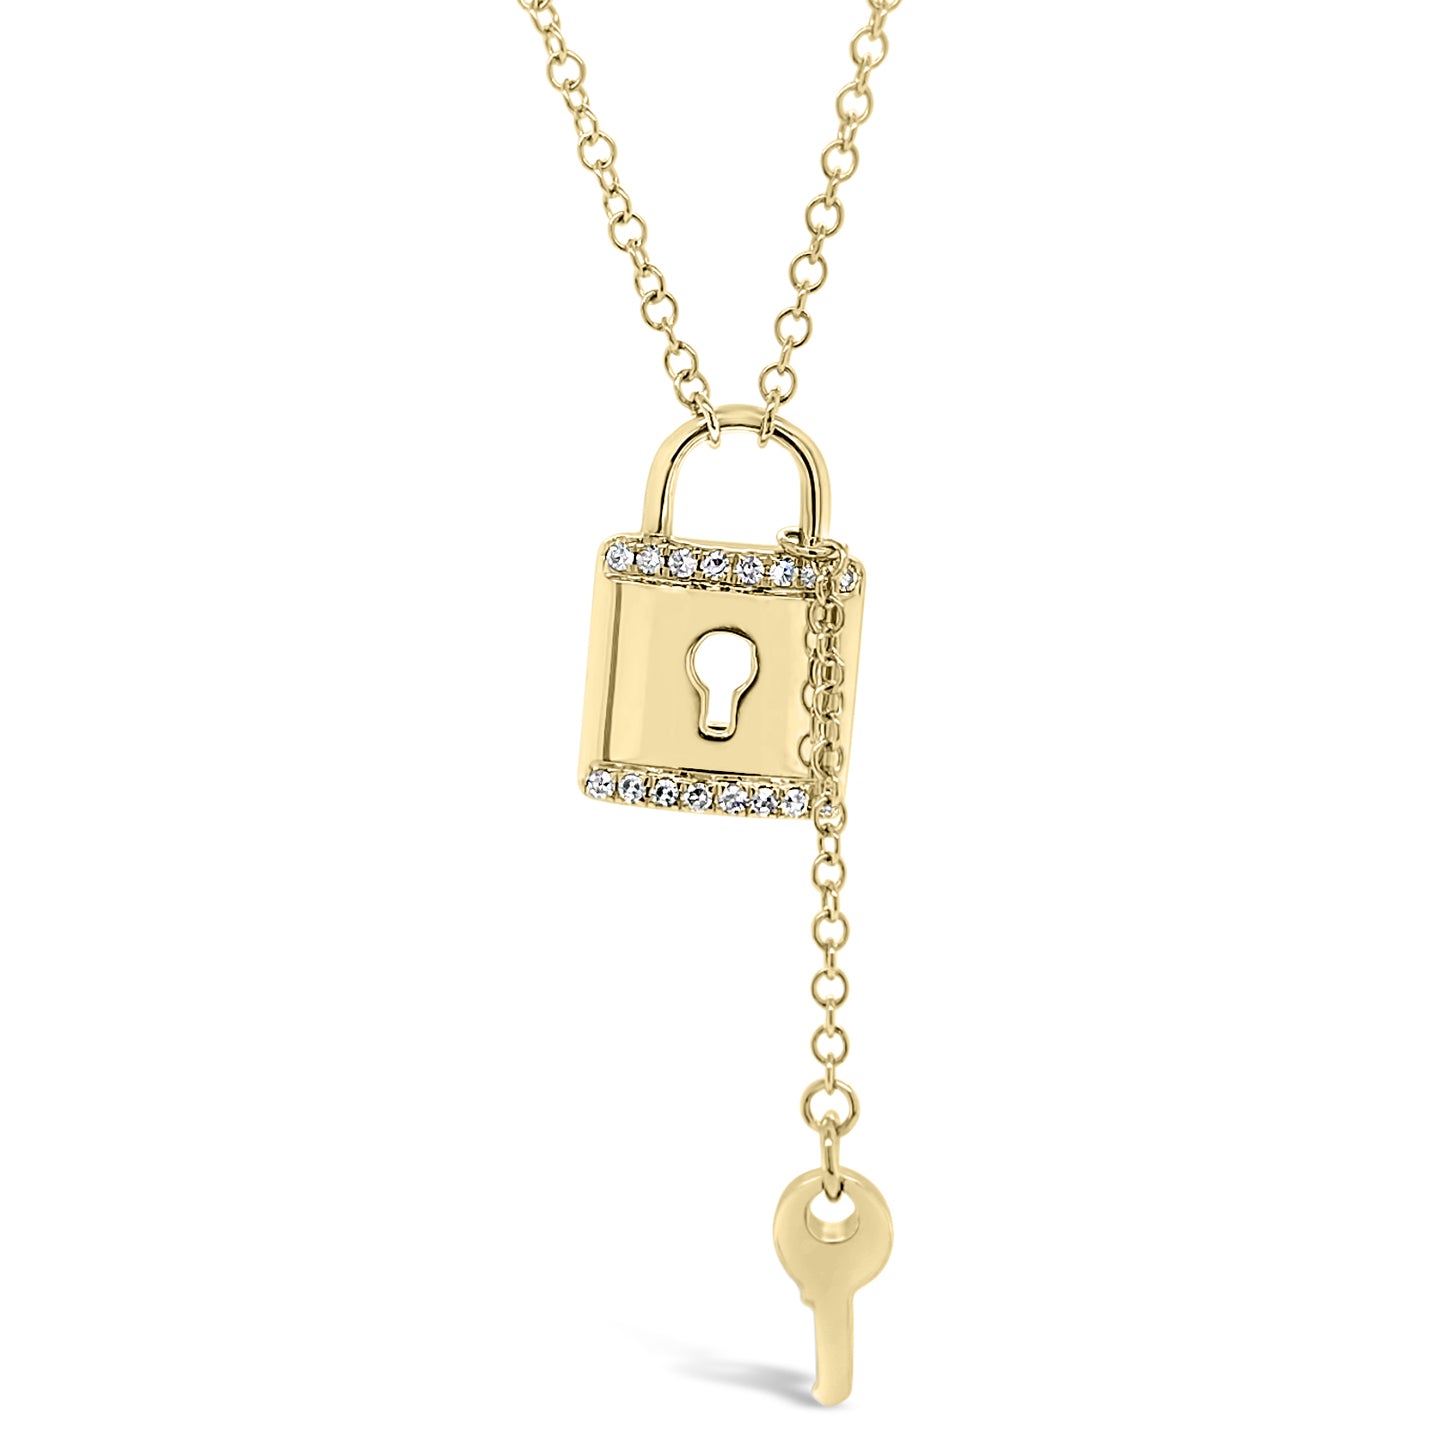 KC Designs 14k Gold and Diamond Lock and Key Necklace N1748 - The